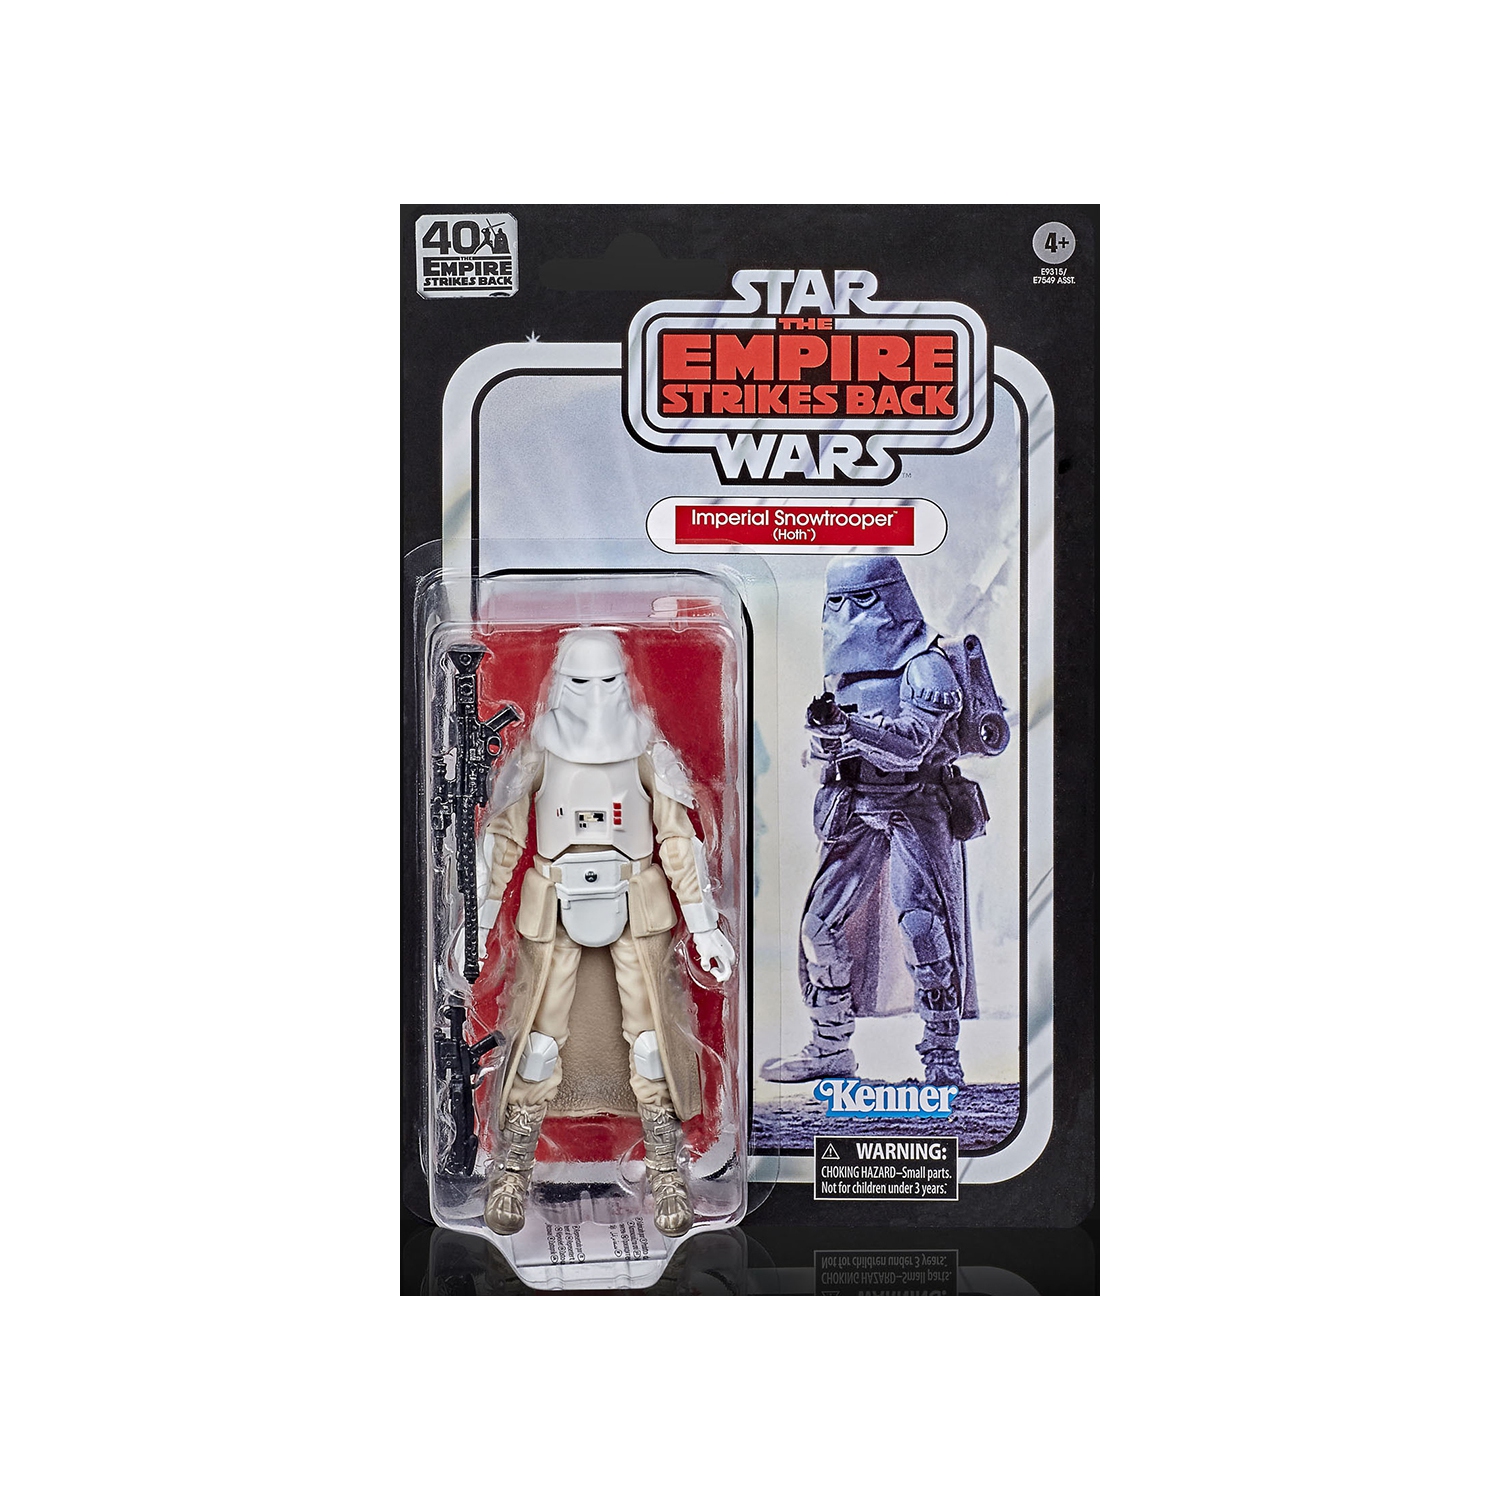 Star Wars 40th Anniversary 6 Inch Action Figure (2020 Wave 3) - Imperial Snowtrooper